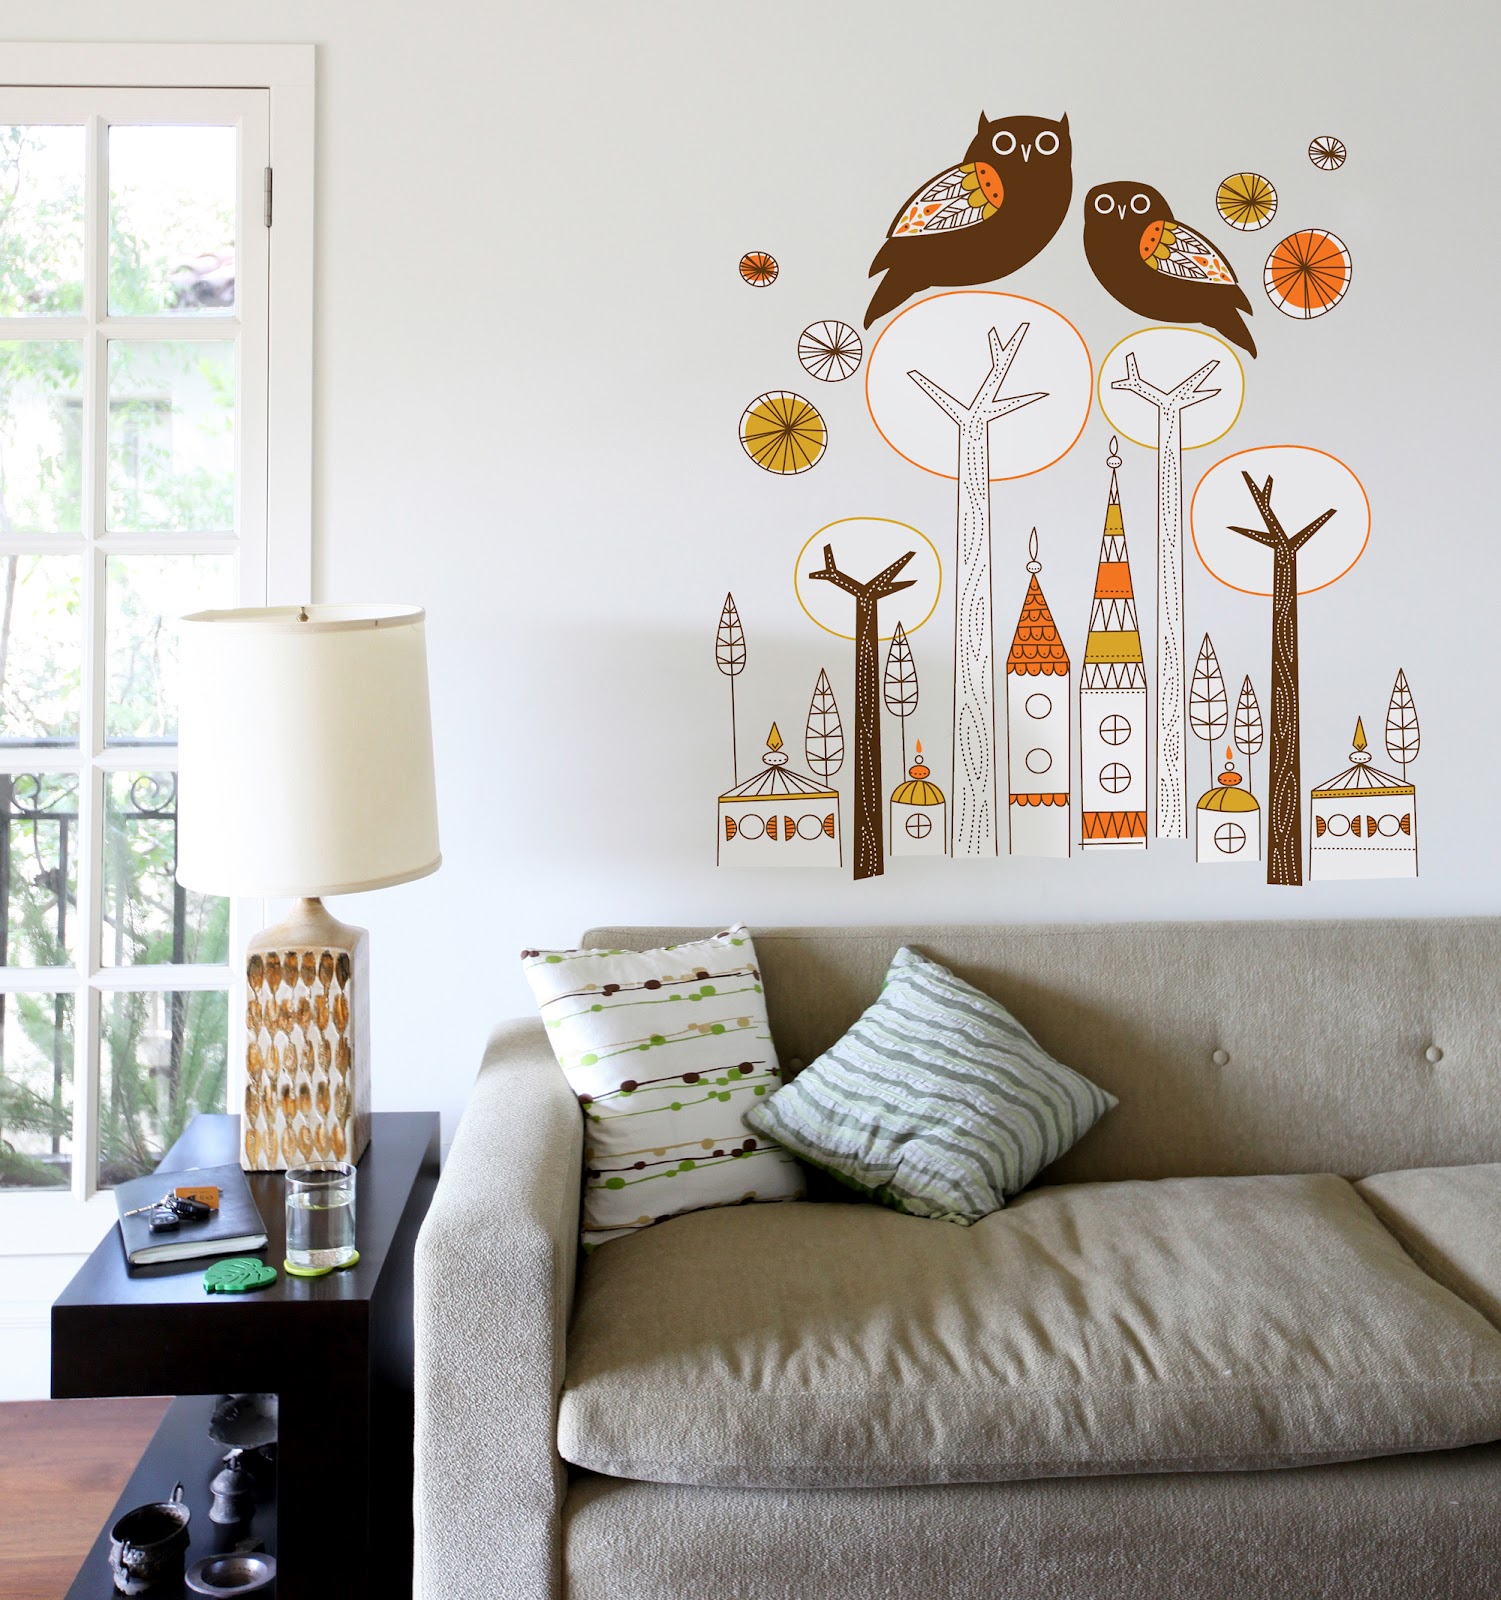 Uniqeu Wall Stickers Ideas for Your Home HOME INSPIRATIONS